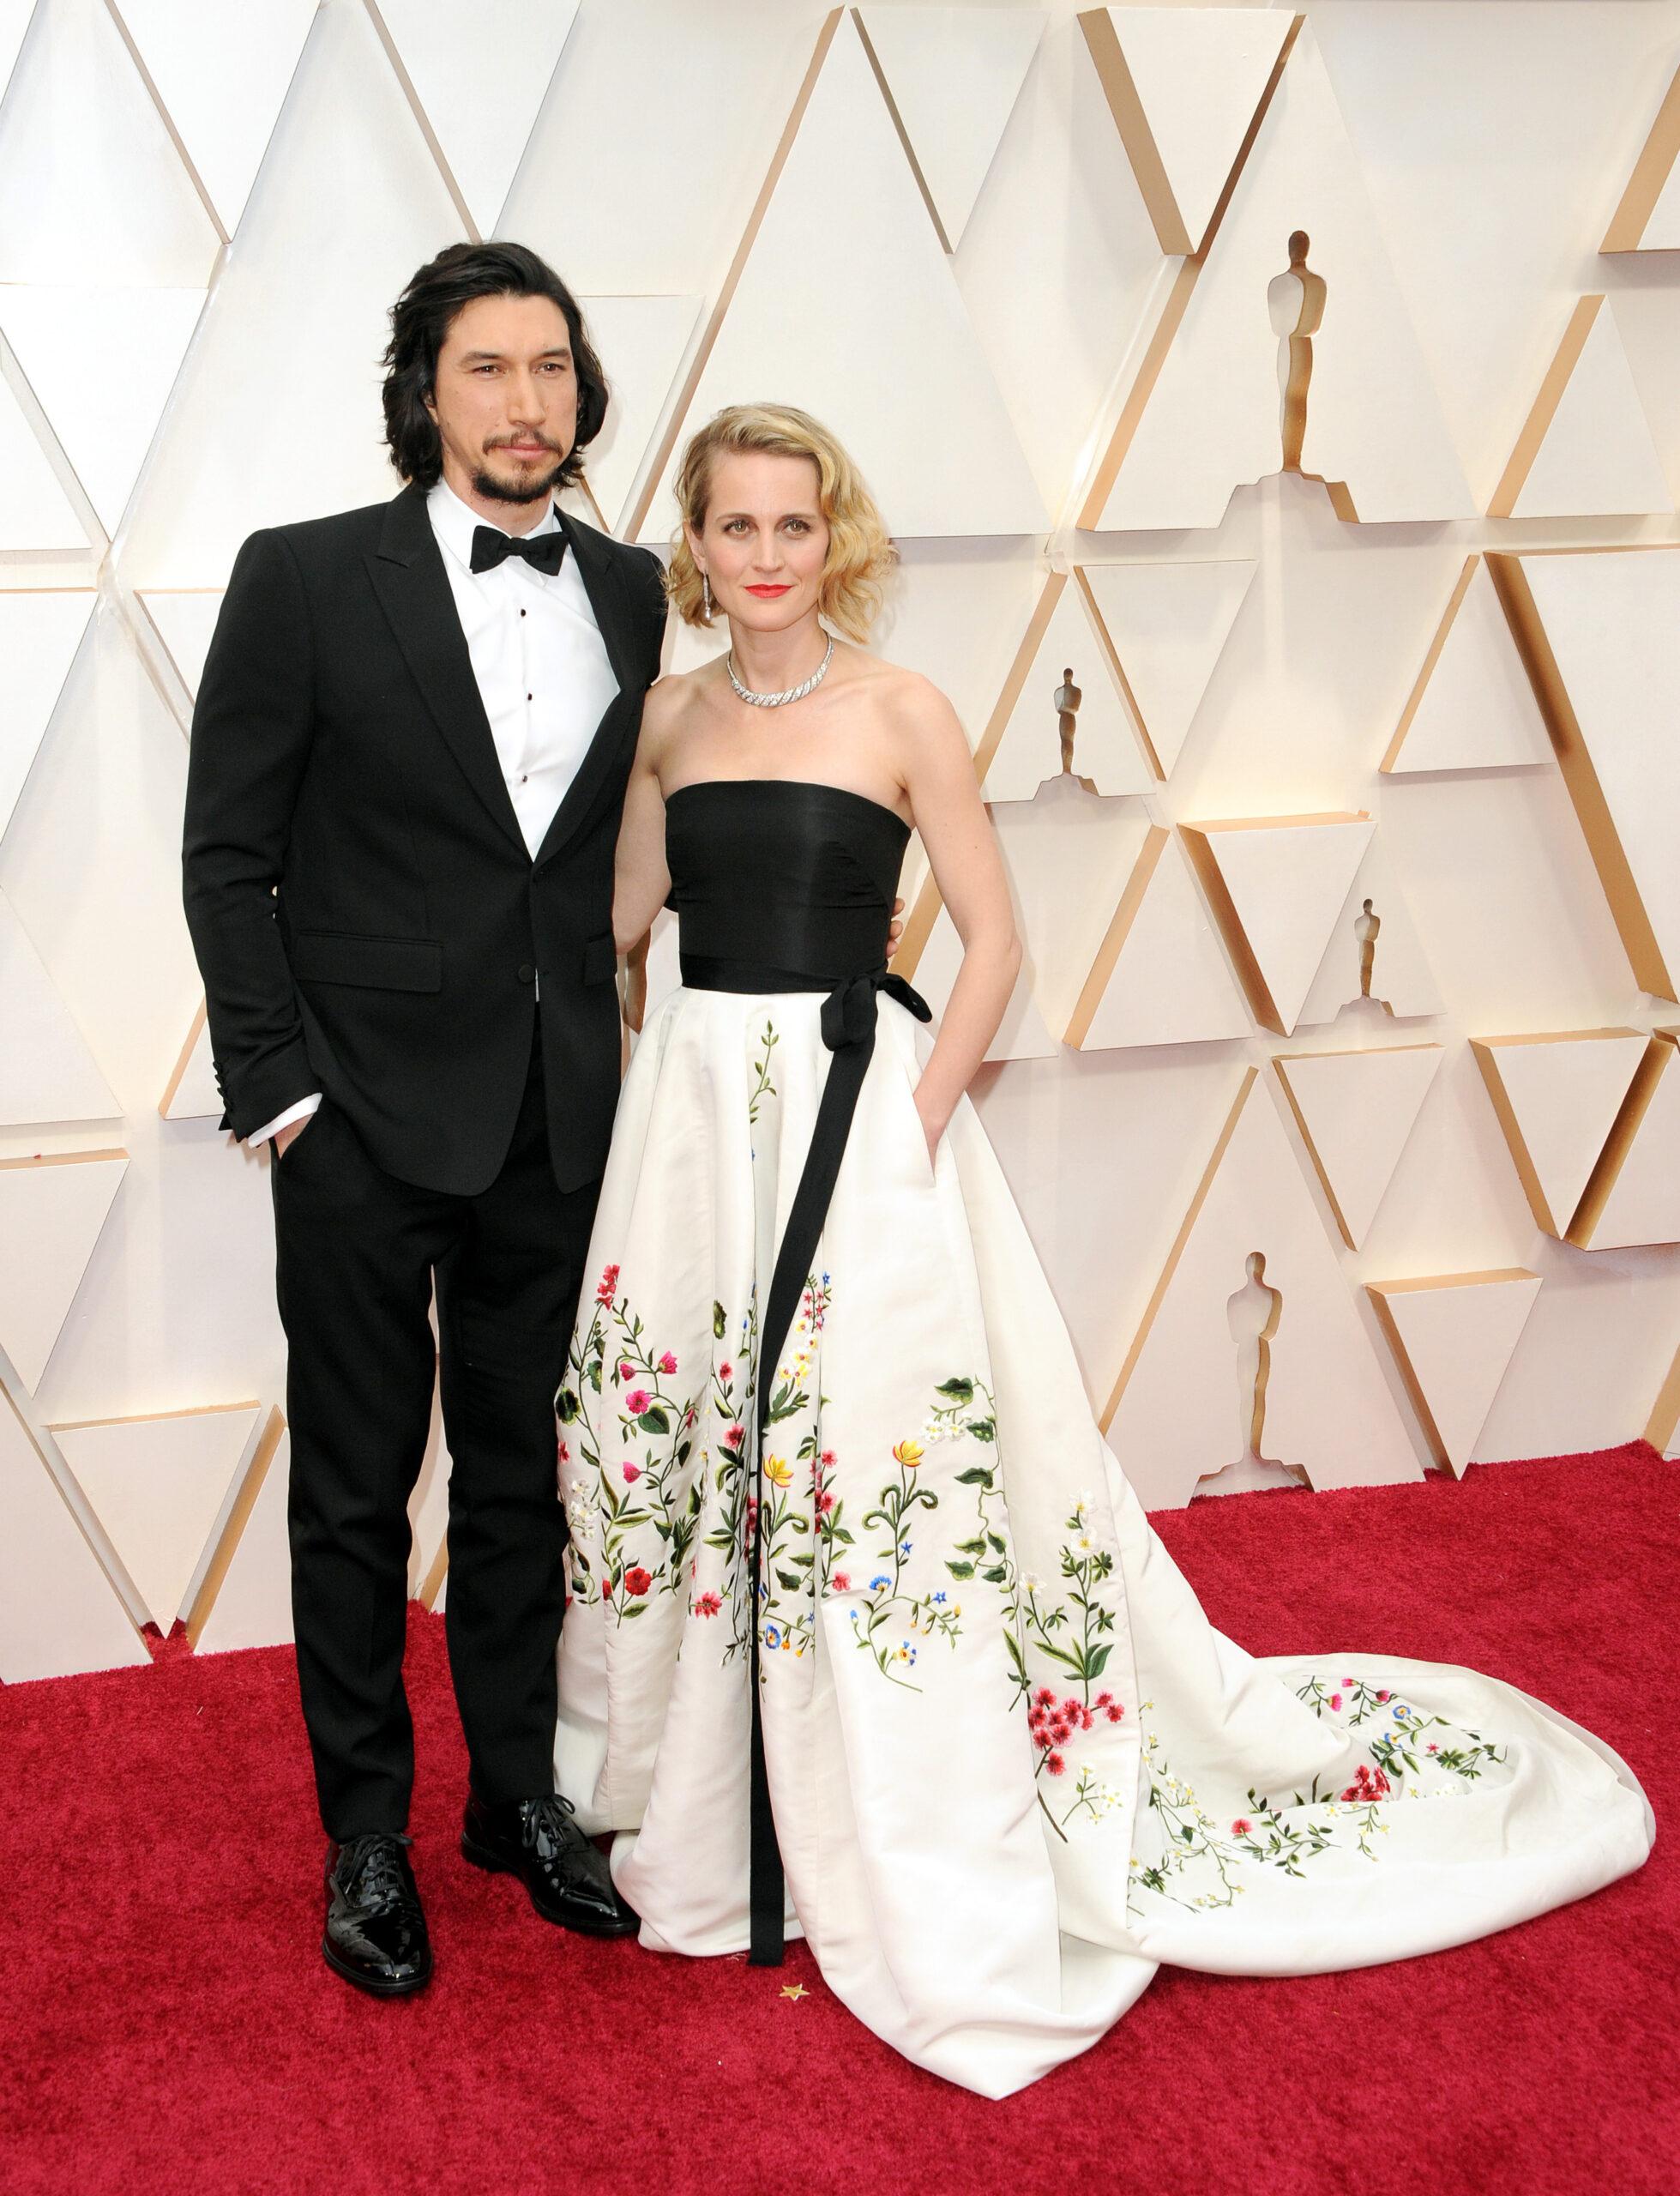 92nd Academy Awards held at the Dolby Theatre in Hollywood. 09 Feb 2020 Pictured: Adam Driver, Joanne Tucker. Photo credit: Lumeimages / MEGA TheMegaAgency.com +1 888 505 6342 (Mega Agency TagID: MEGA634460_025.jpg) [Photo via Mega Agency]